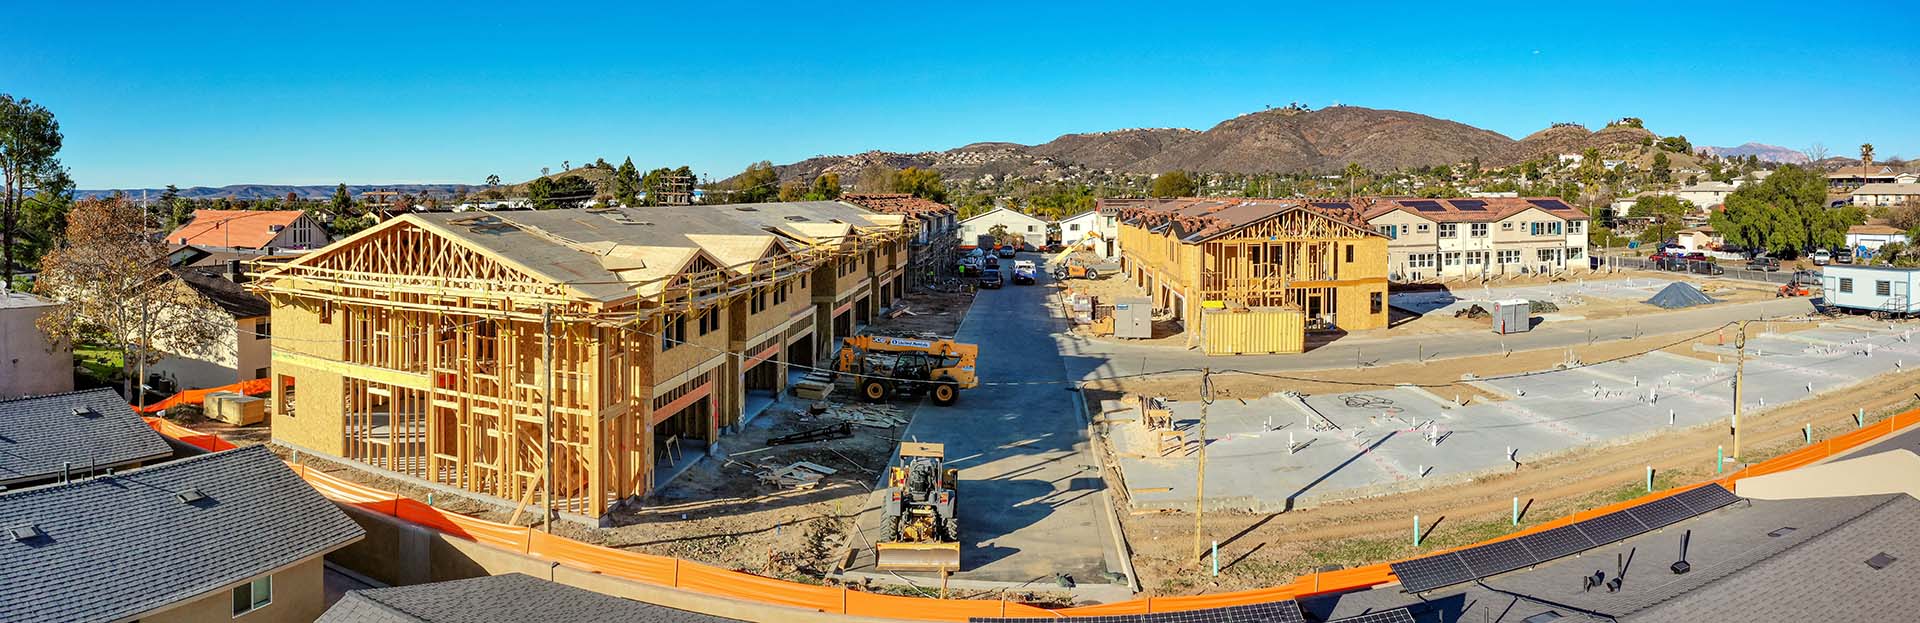 Hallmark Communities, El Cajon, CA –Completed May 2023 (Residential Build Projects by Agorus)